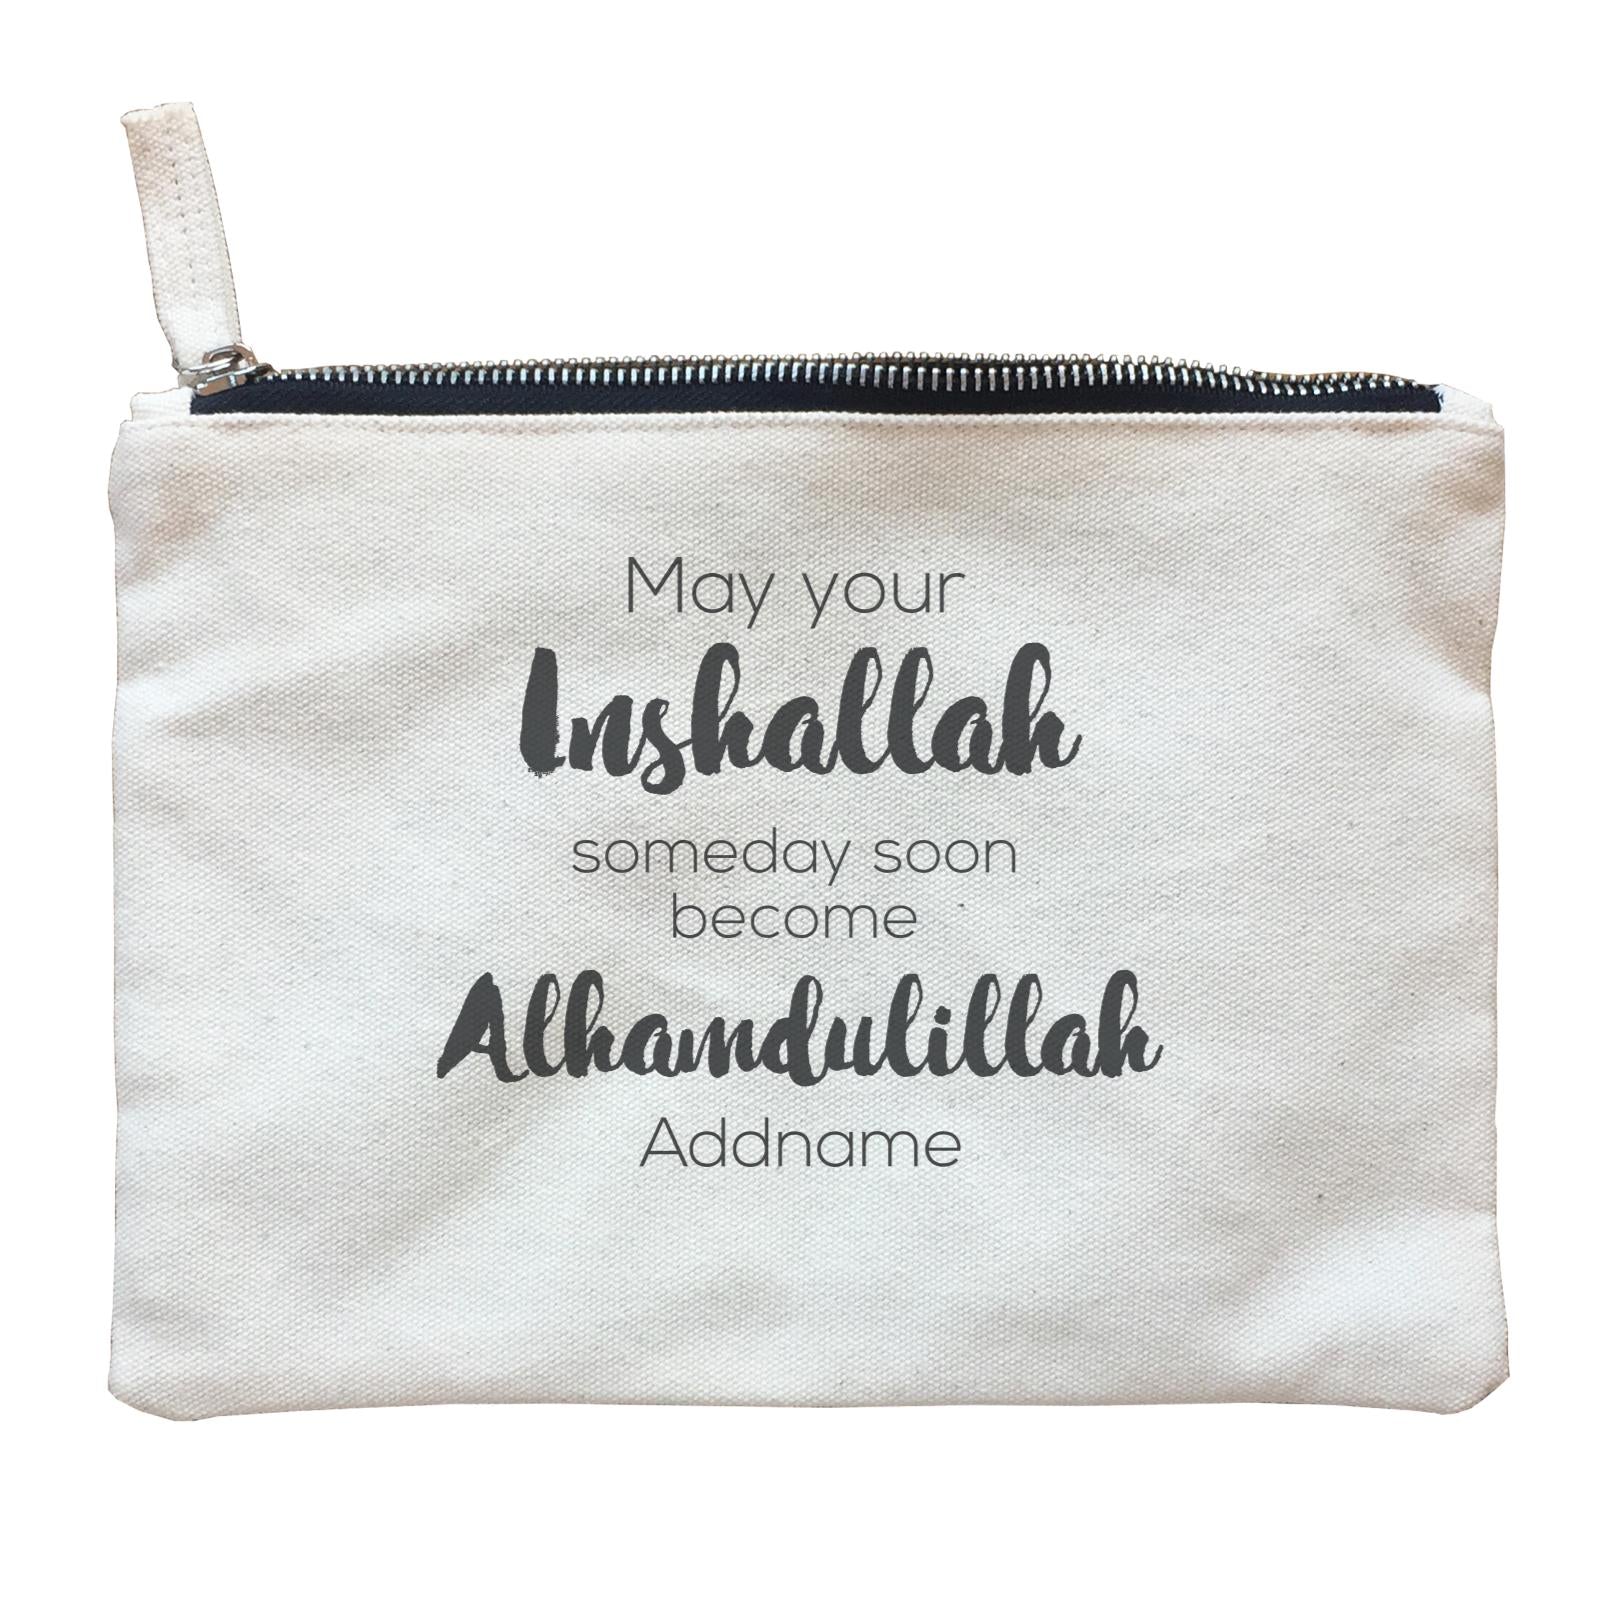 May Inshaallah Someday Soon Become Alhamdulillah Addname Zipper Pouch